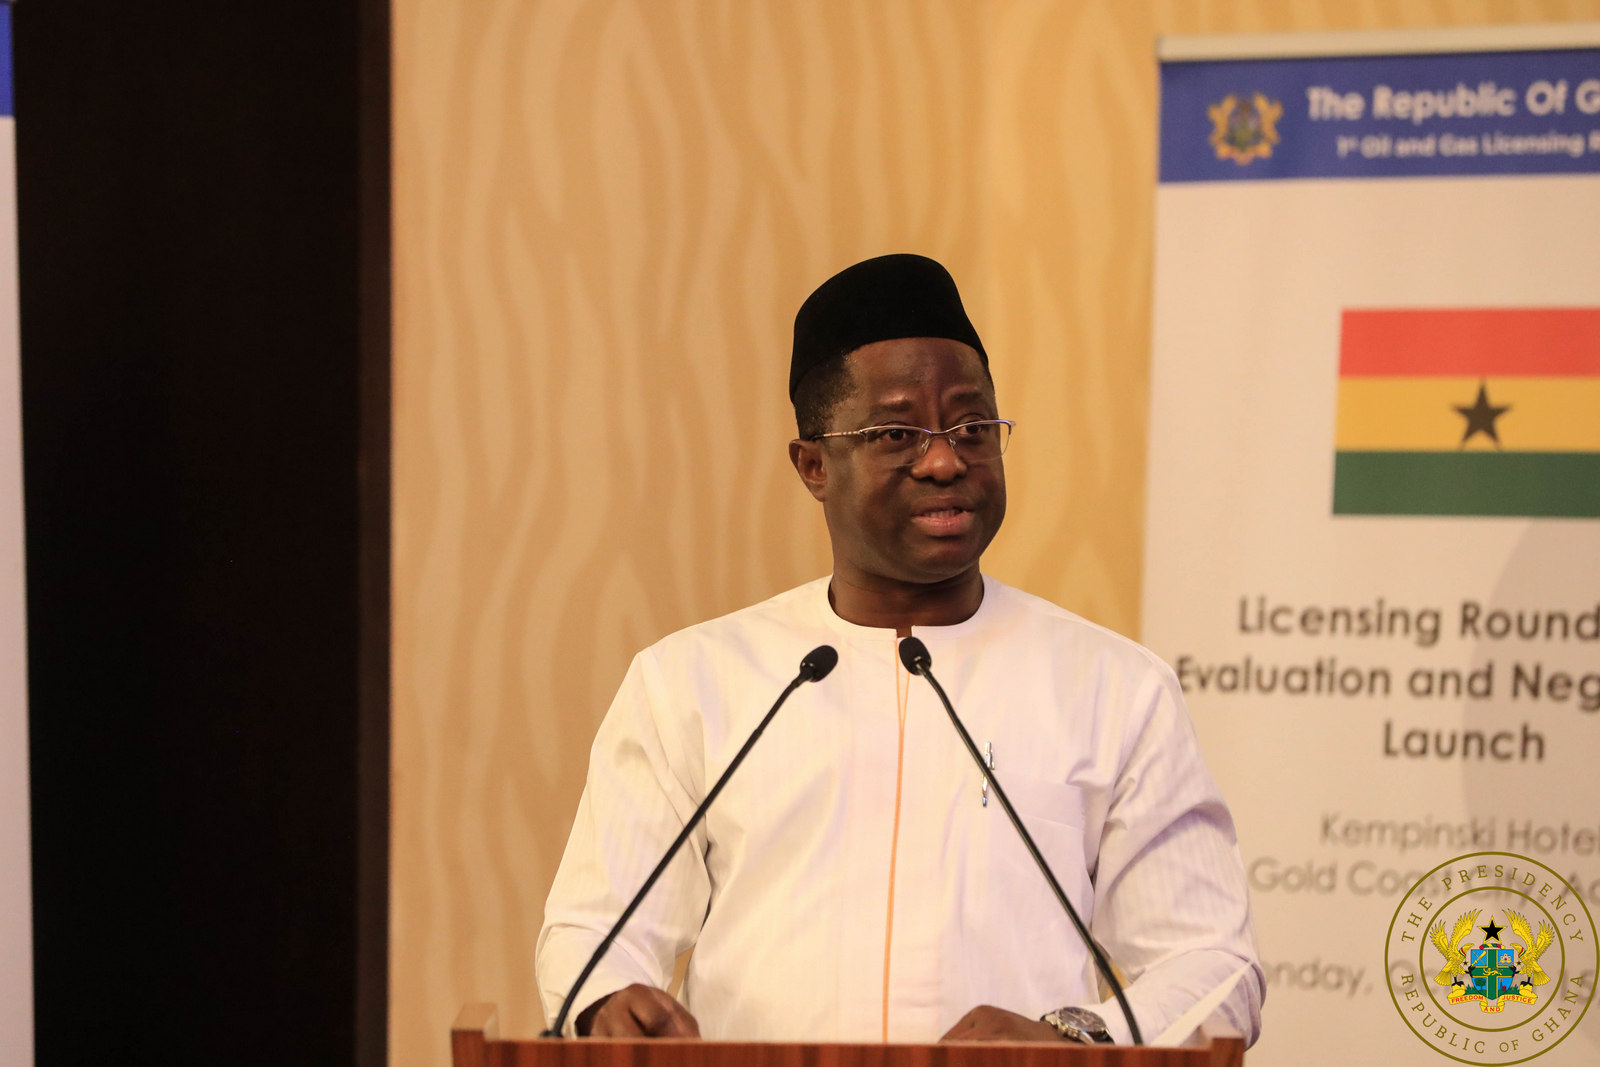 Minister for Energy John Peter Amewu at the event